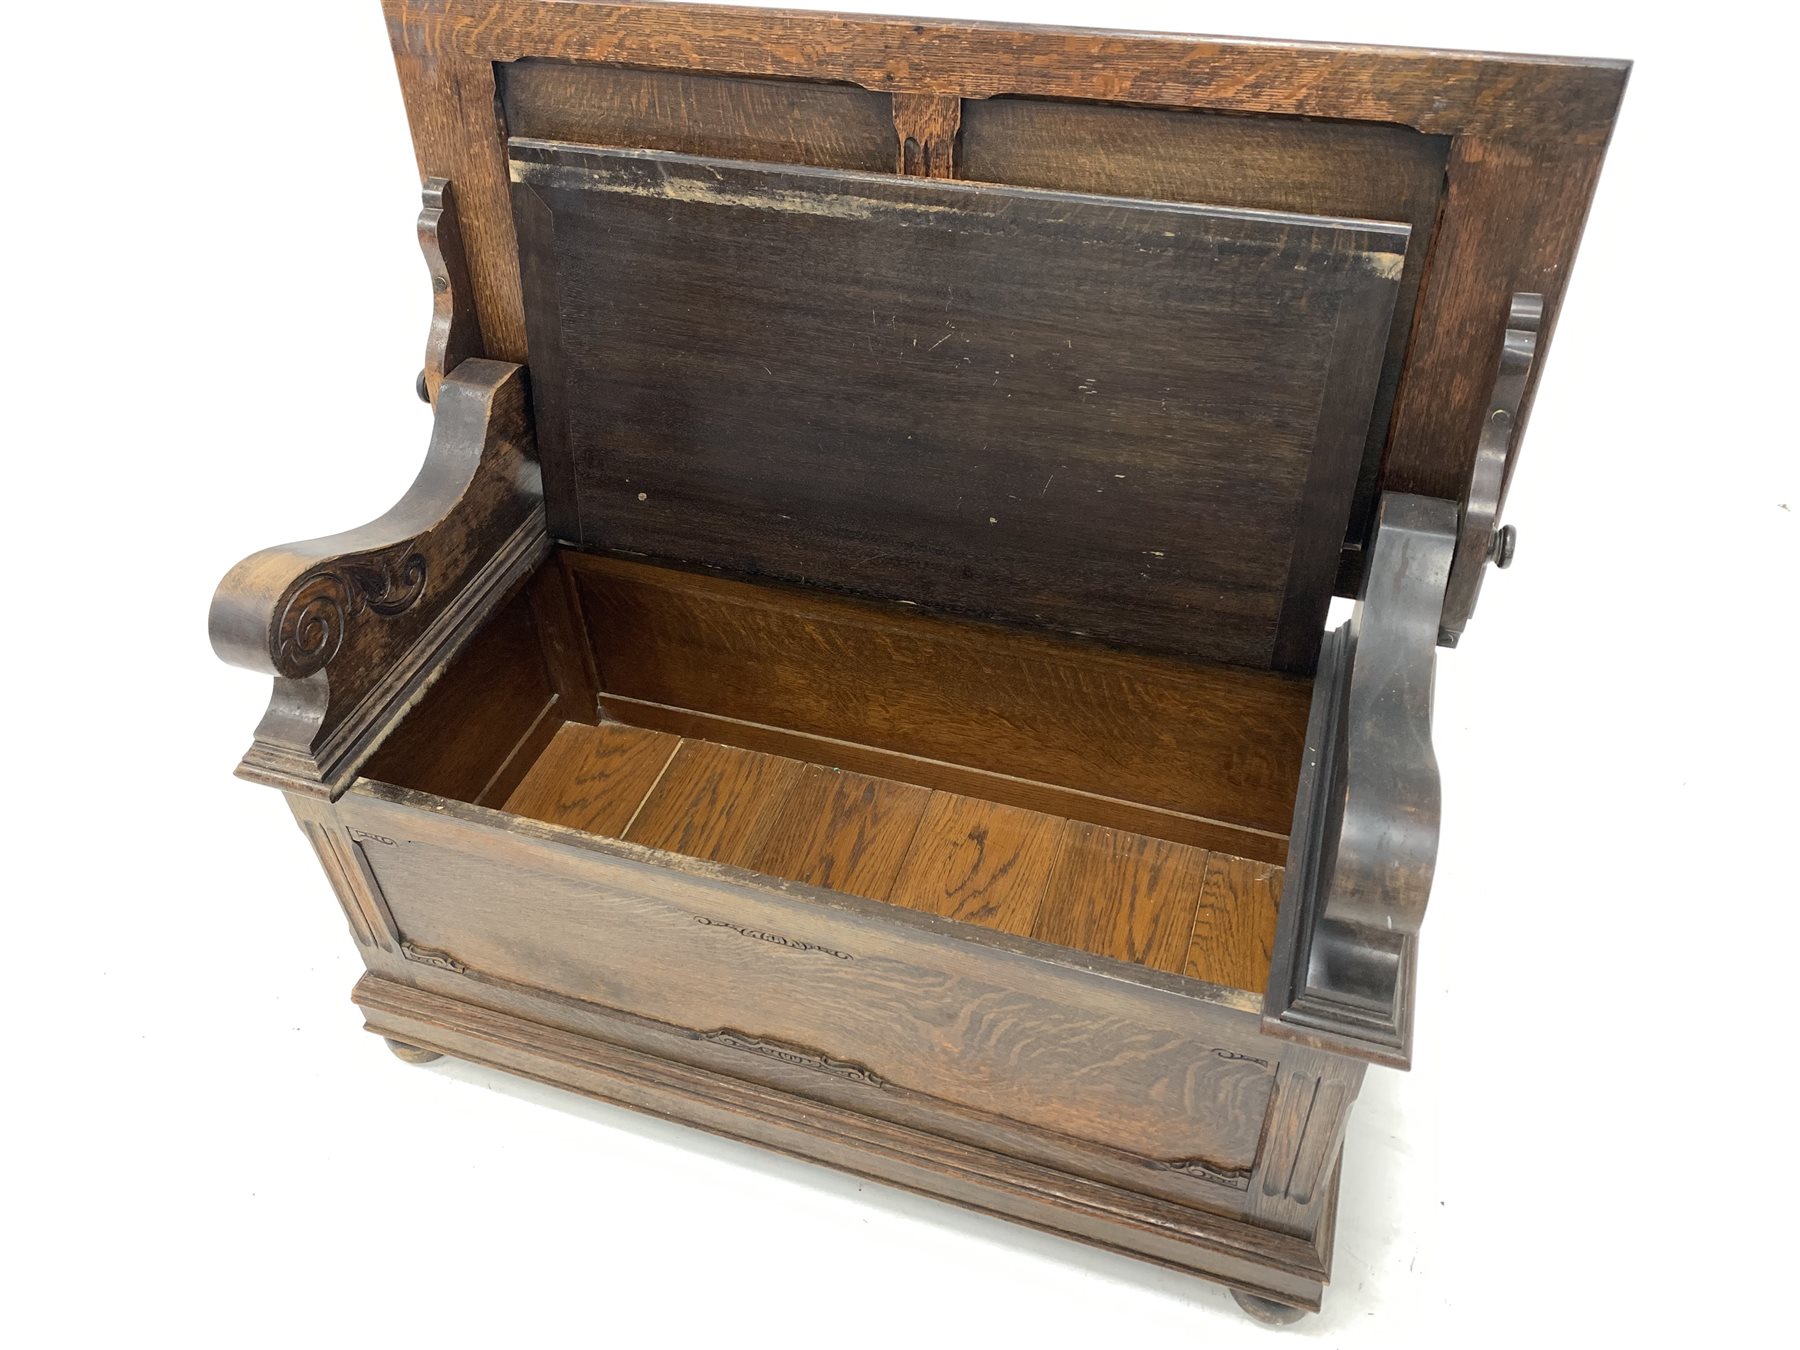 Early 20th century oak monks bench, the folding panelled back rest over hinged seat, panelled front - Image 4 of 4